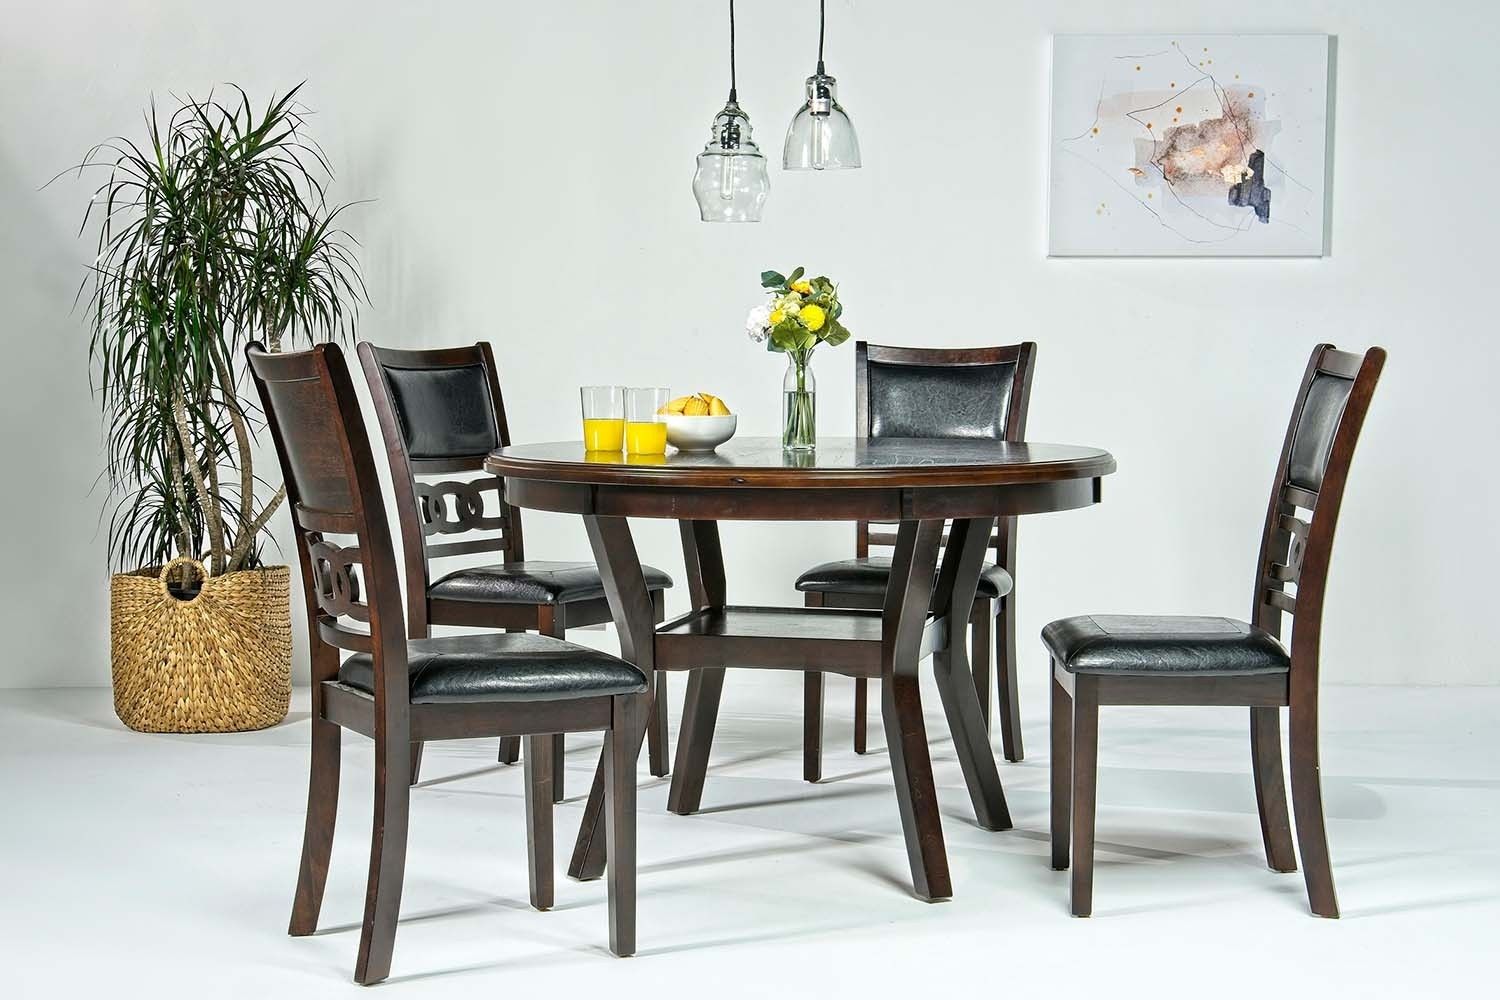 Gia Round Dining Table & 4 Chairs In Dark Brown | Mor Intended For Best And Newest Dark Brown Round Dining Tables (View 11 of 15)